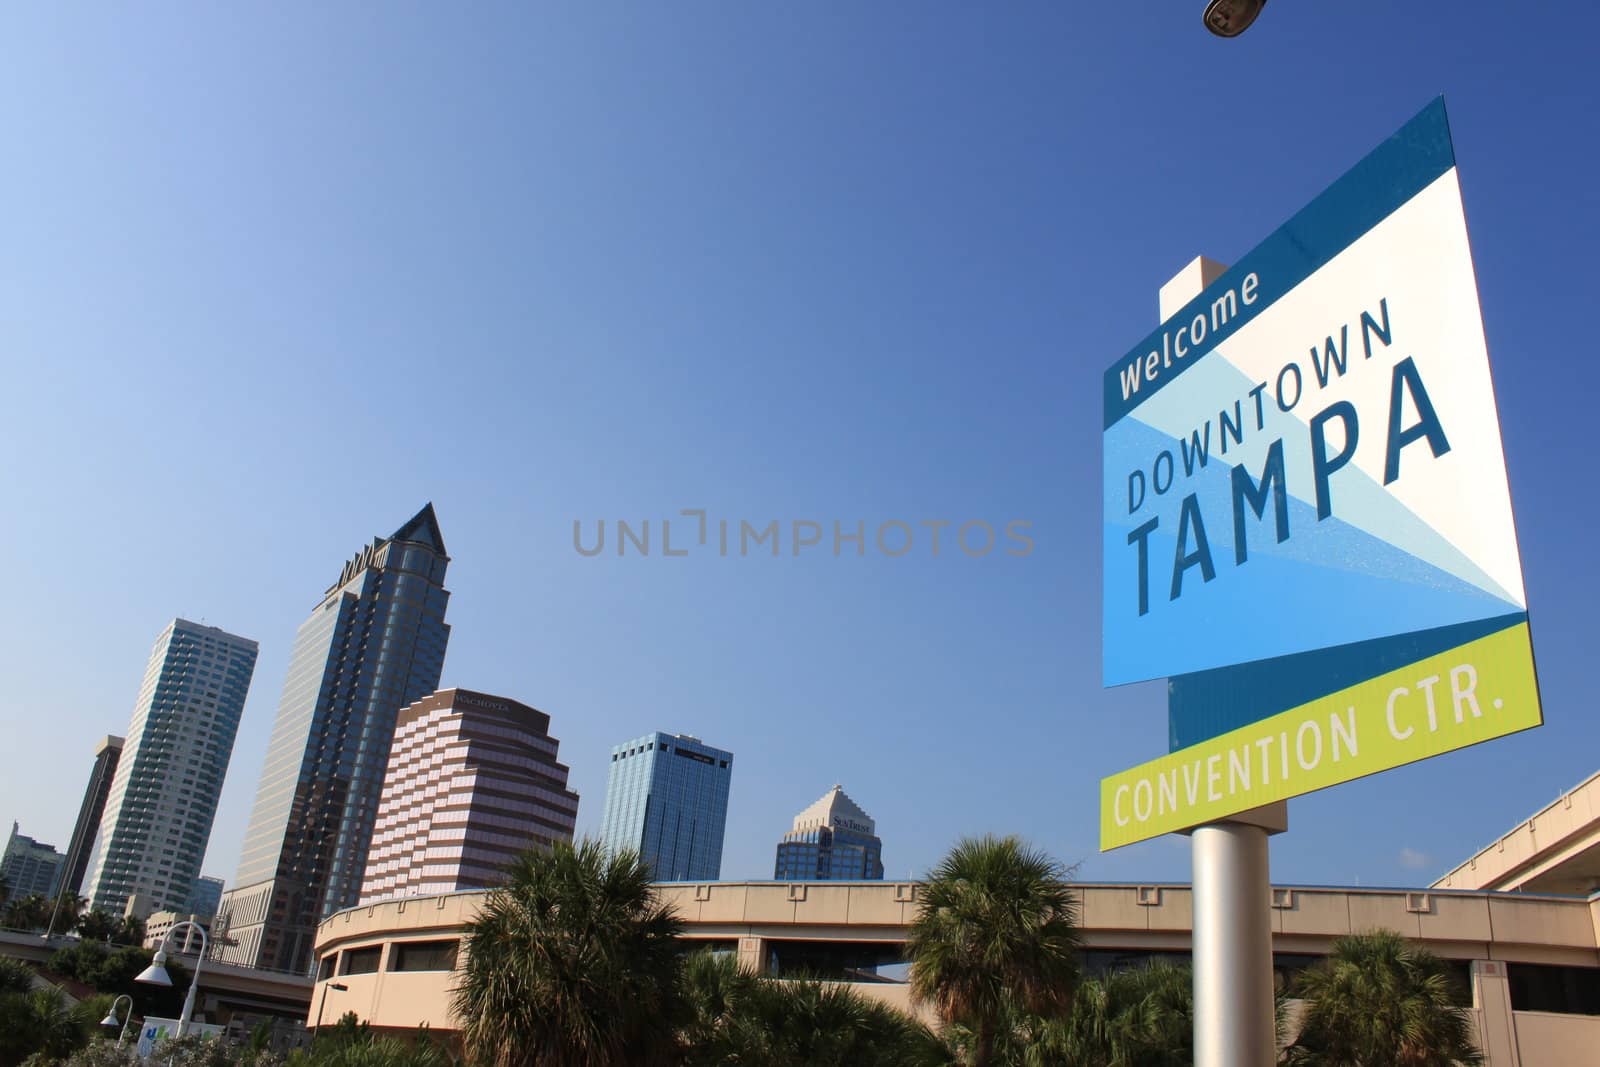 Tampa by ppawel